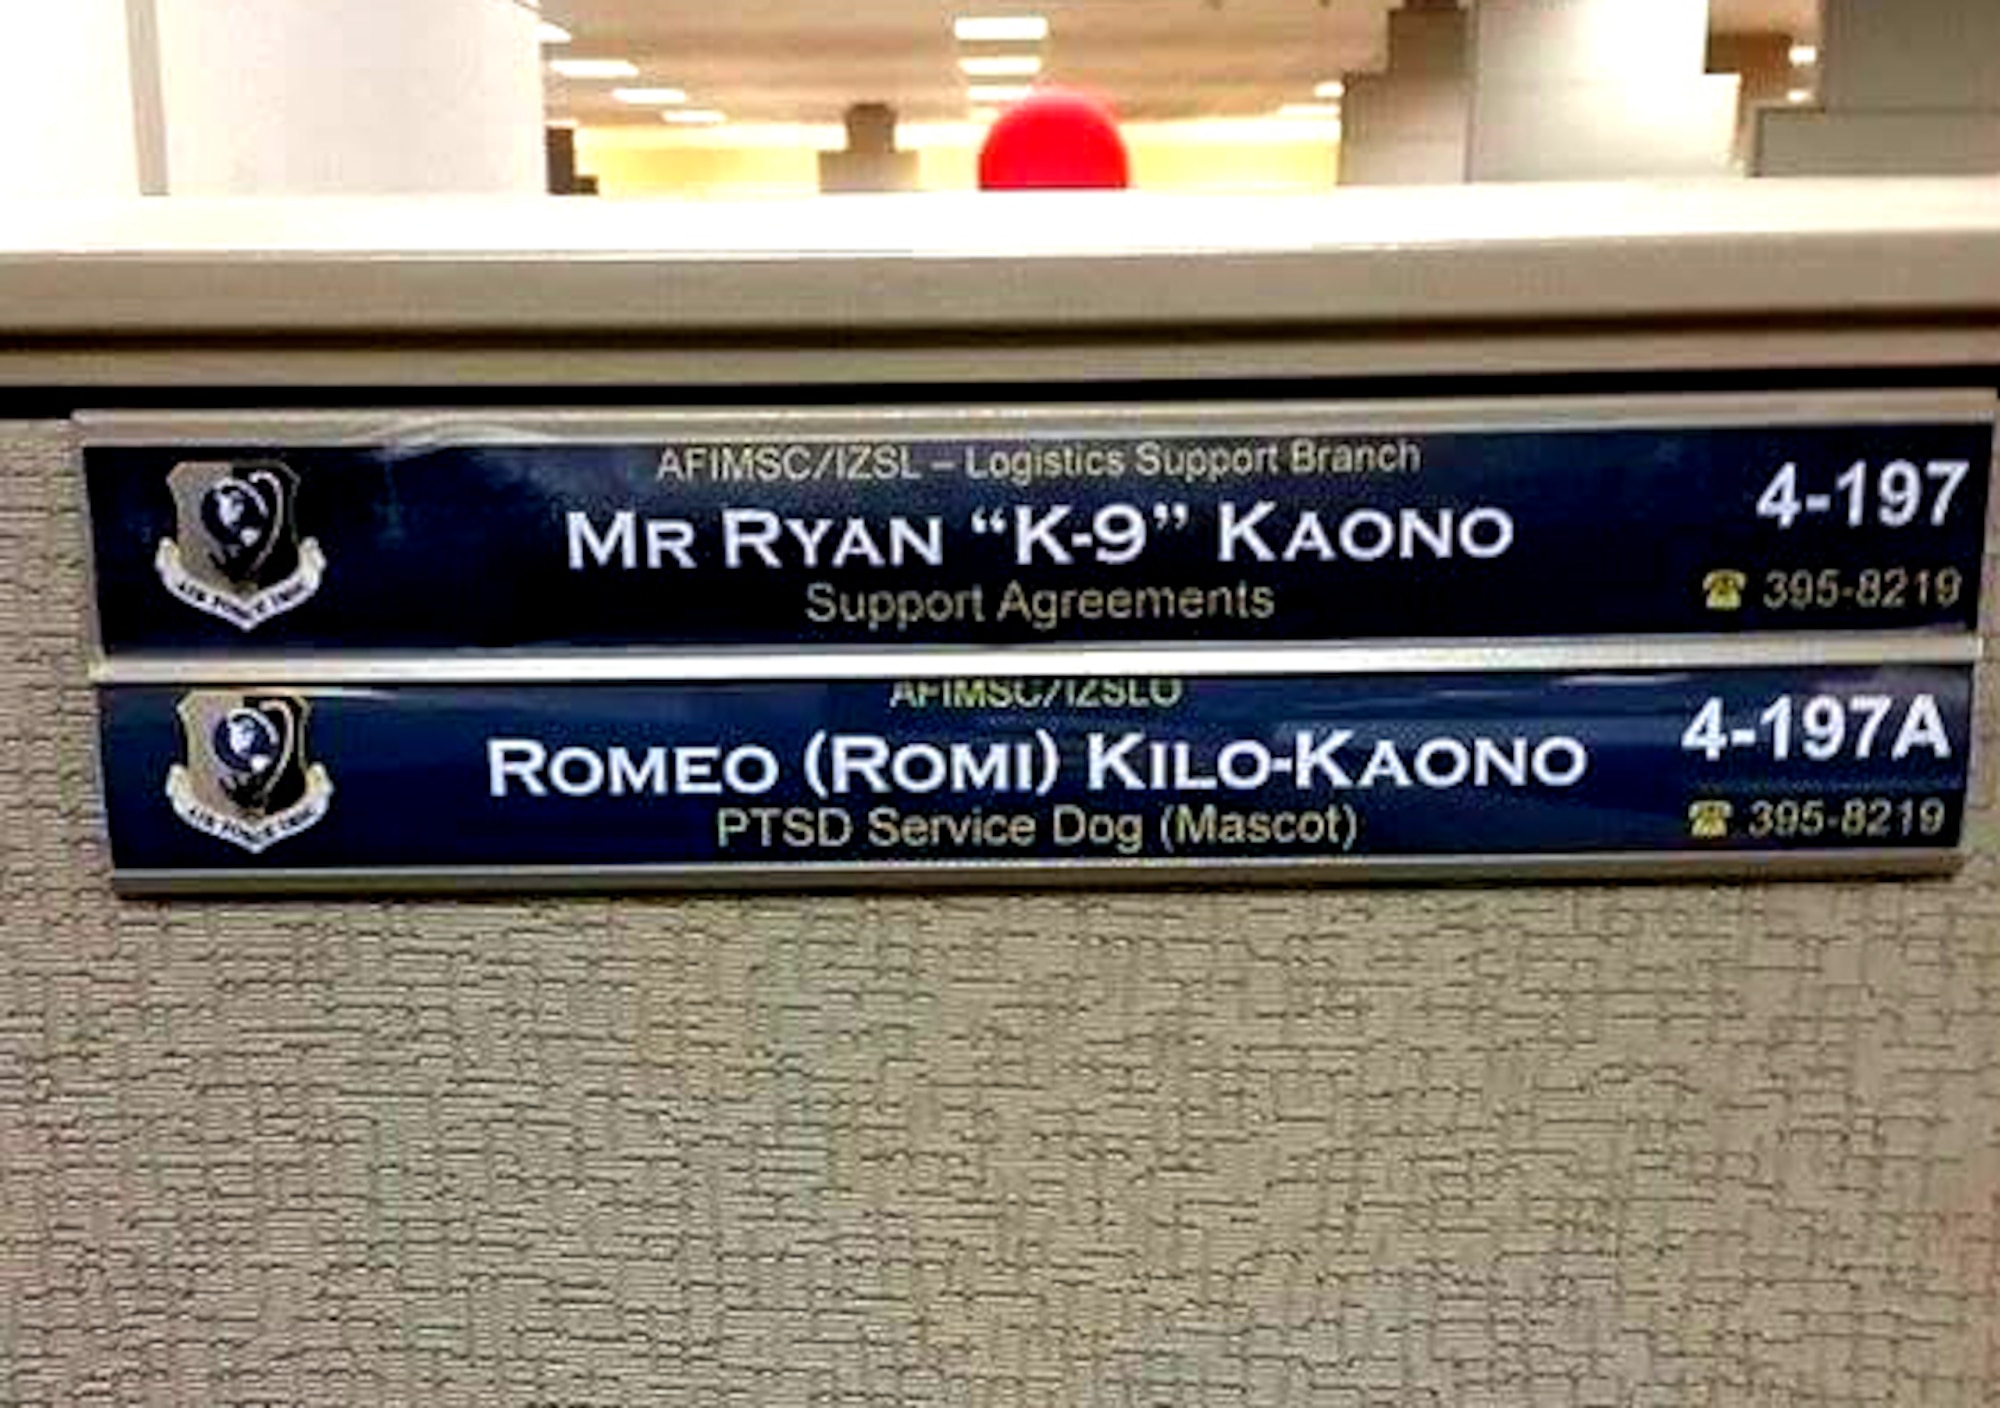 Ryan Kaono's work area clearly shows his cube mate and service dog Romeo belongs there too. (Courtesy photo)